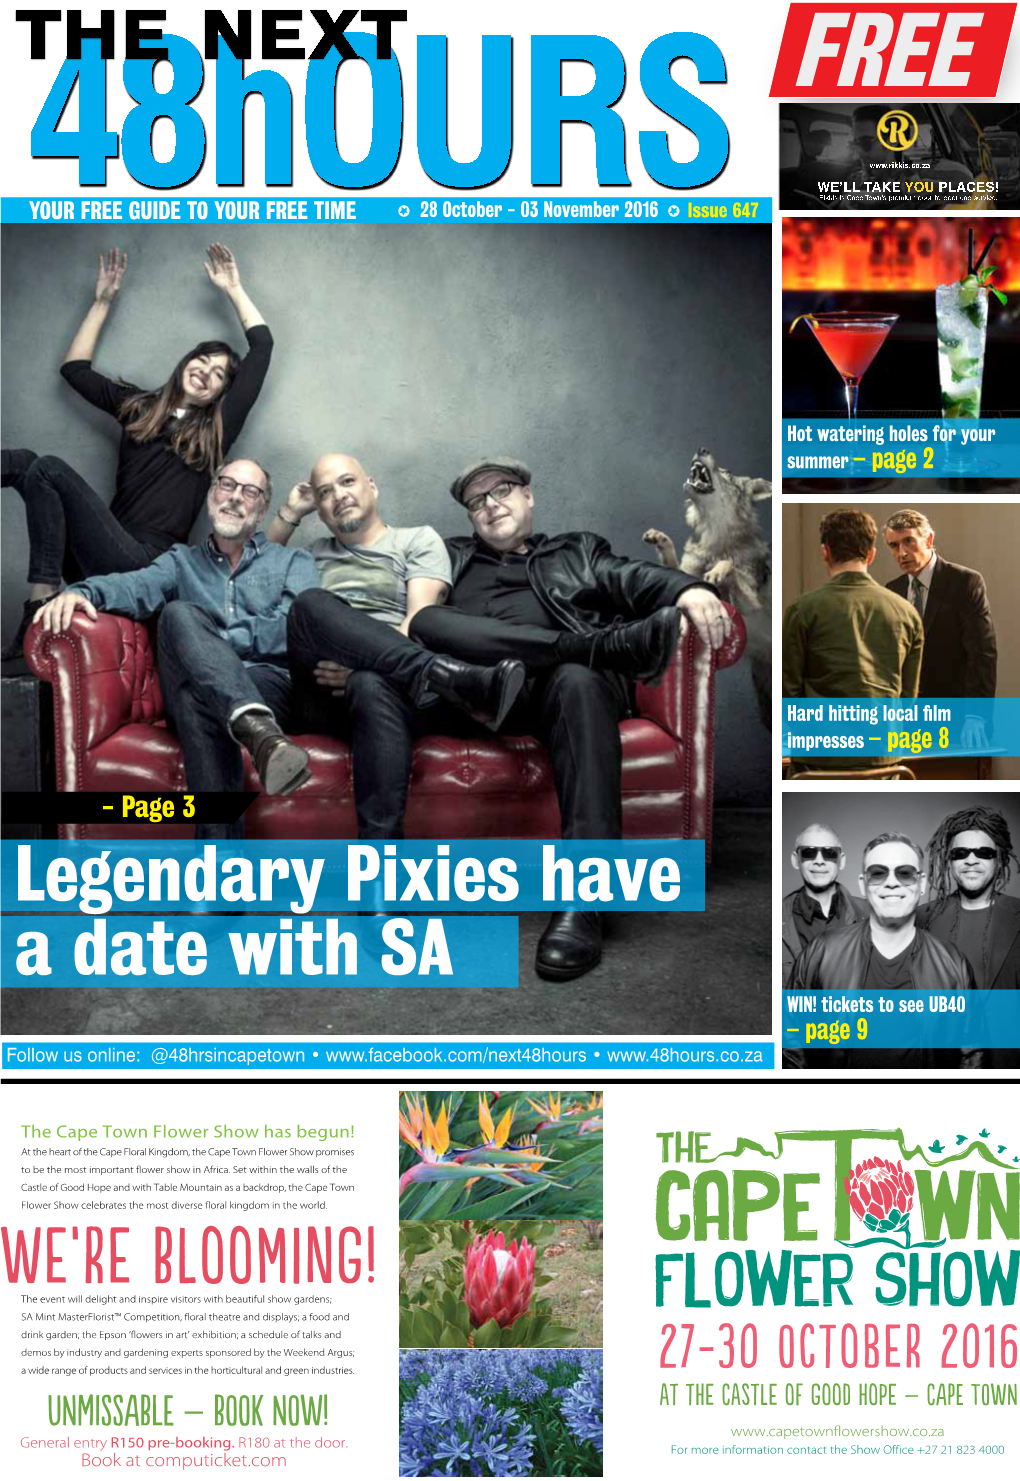 Legendary Pixies Have a Date with SA